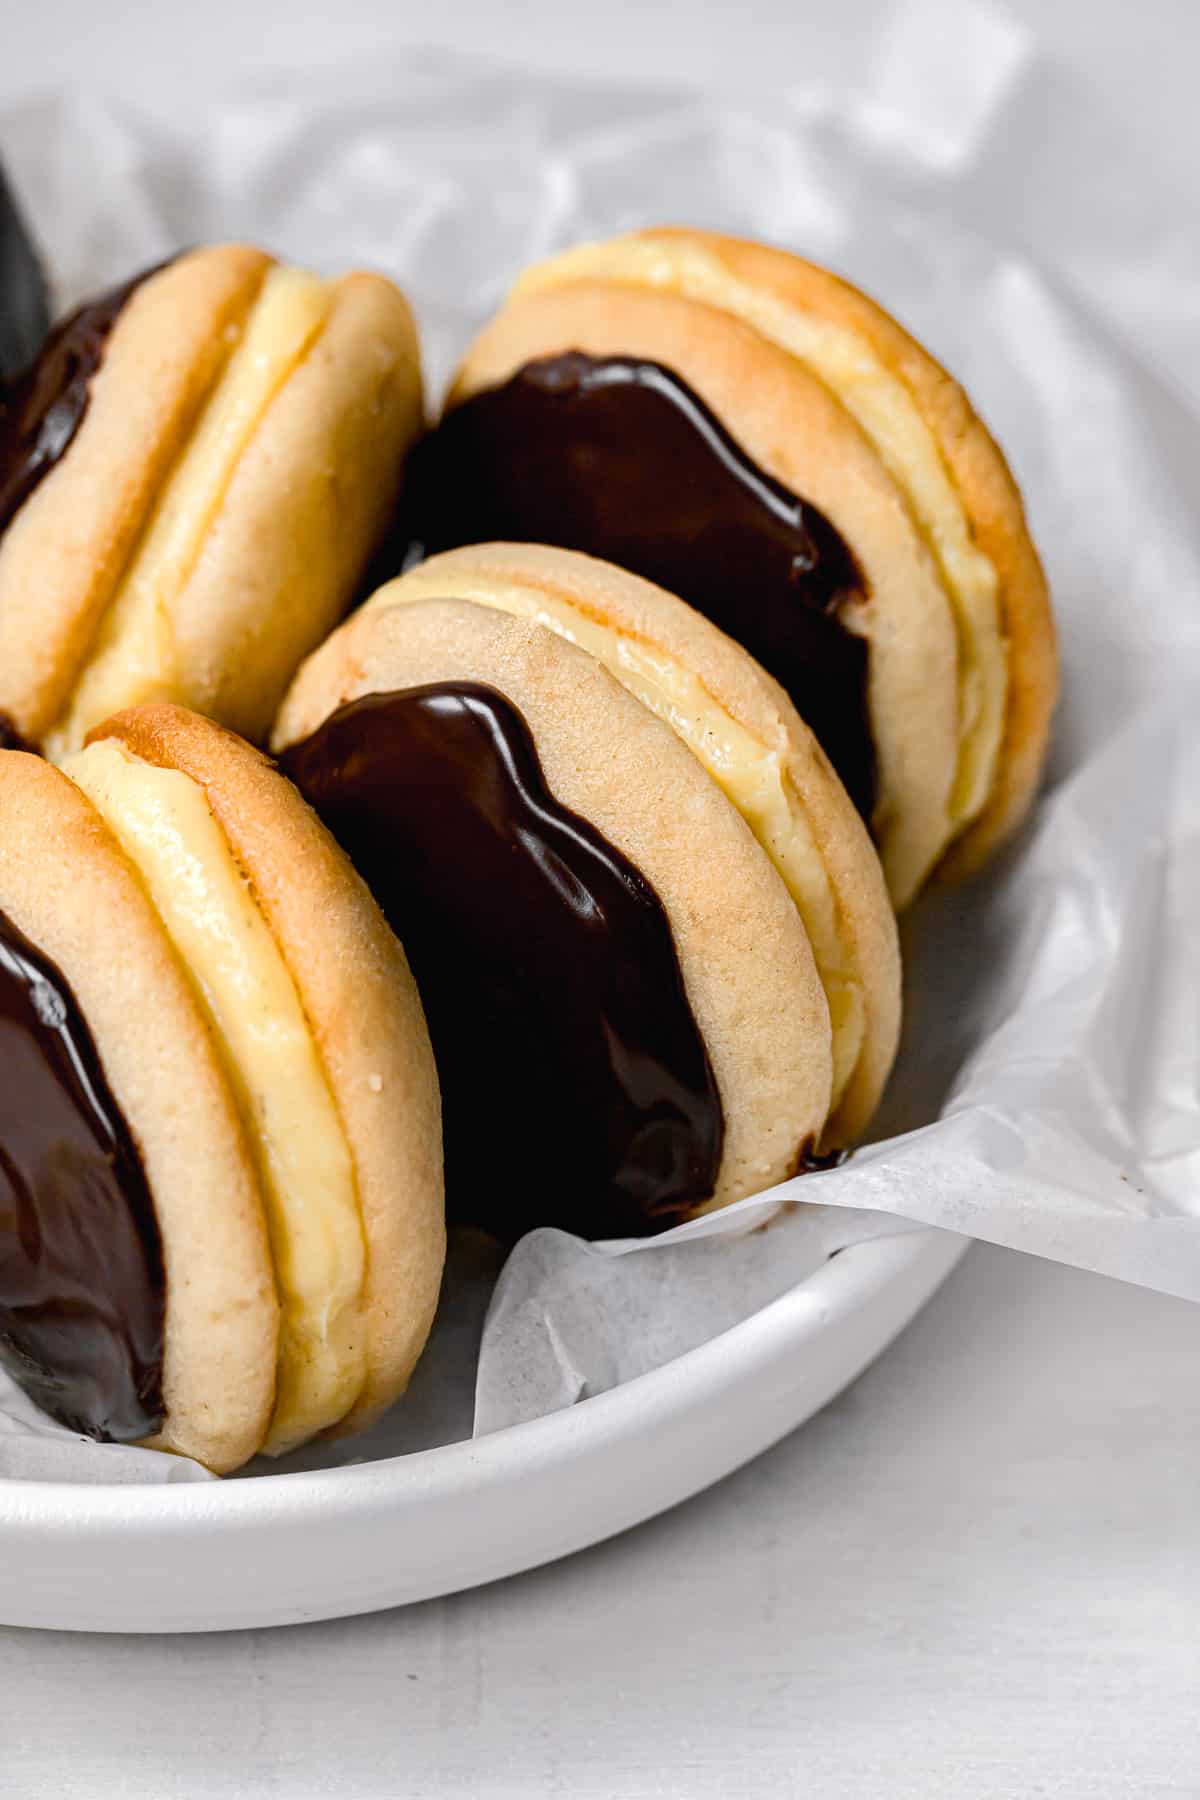 boston cream whoopie pies lined up in white bowl.